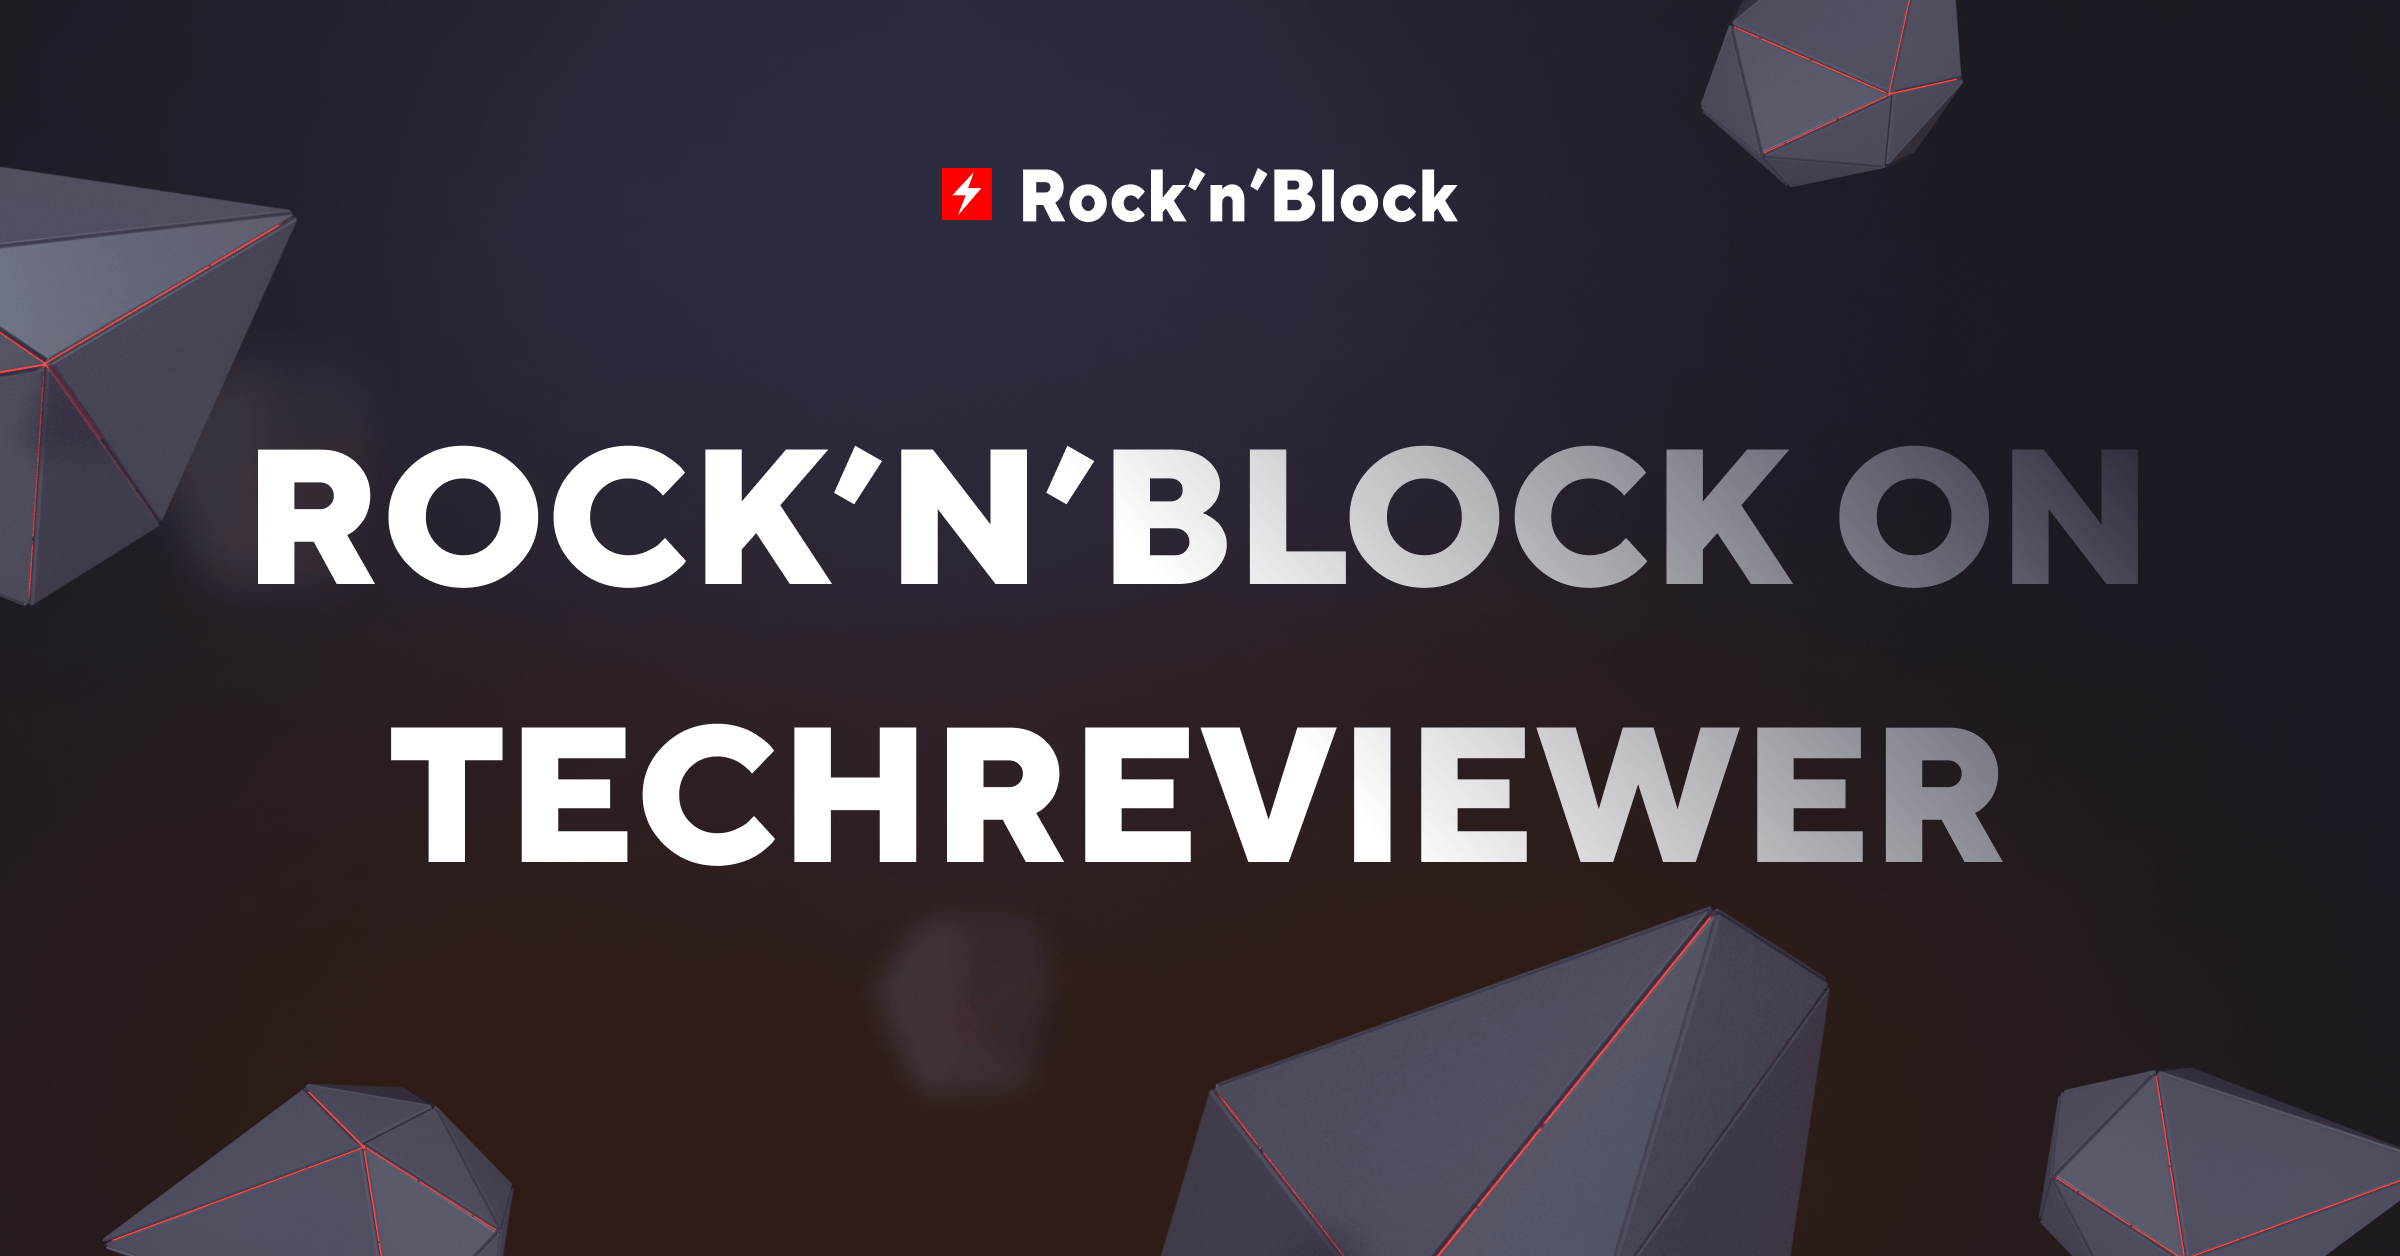 Rock’n’block has been named one of the top blockchain development companies by Techreviewer.co